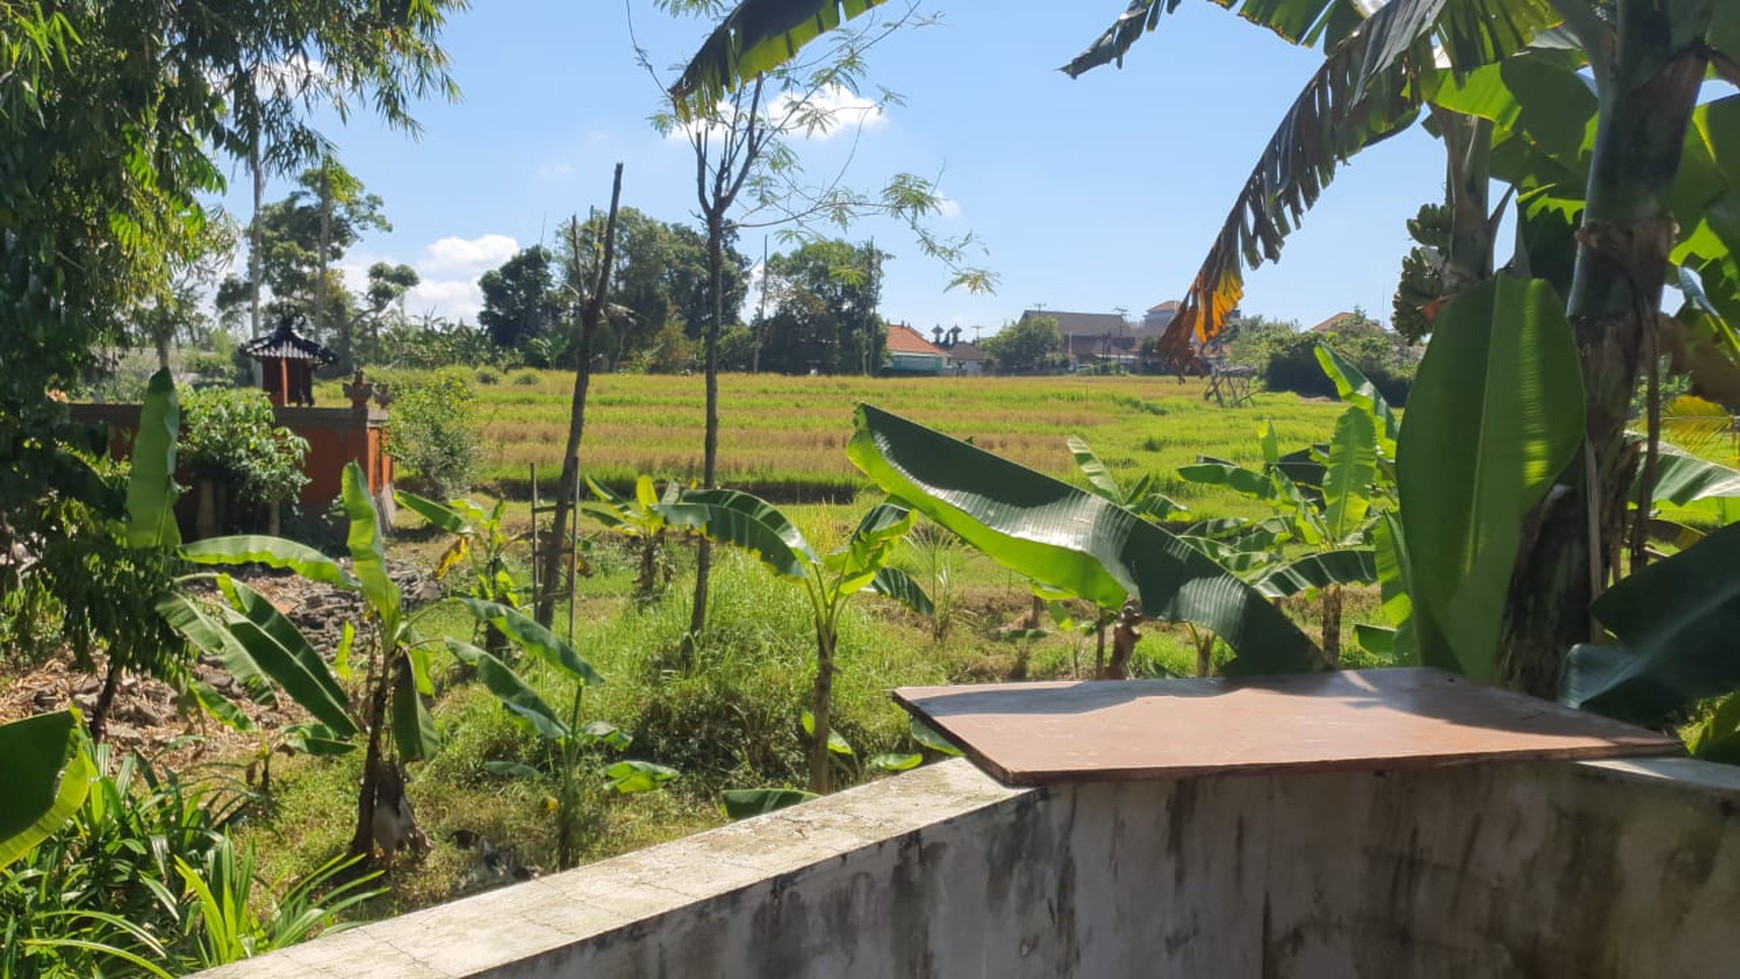 For Sale Leasehold Land in Umalas Tunon